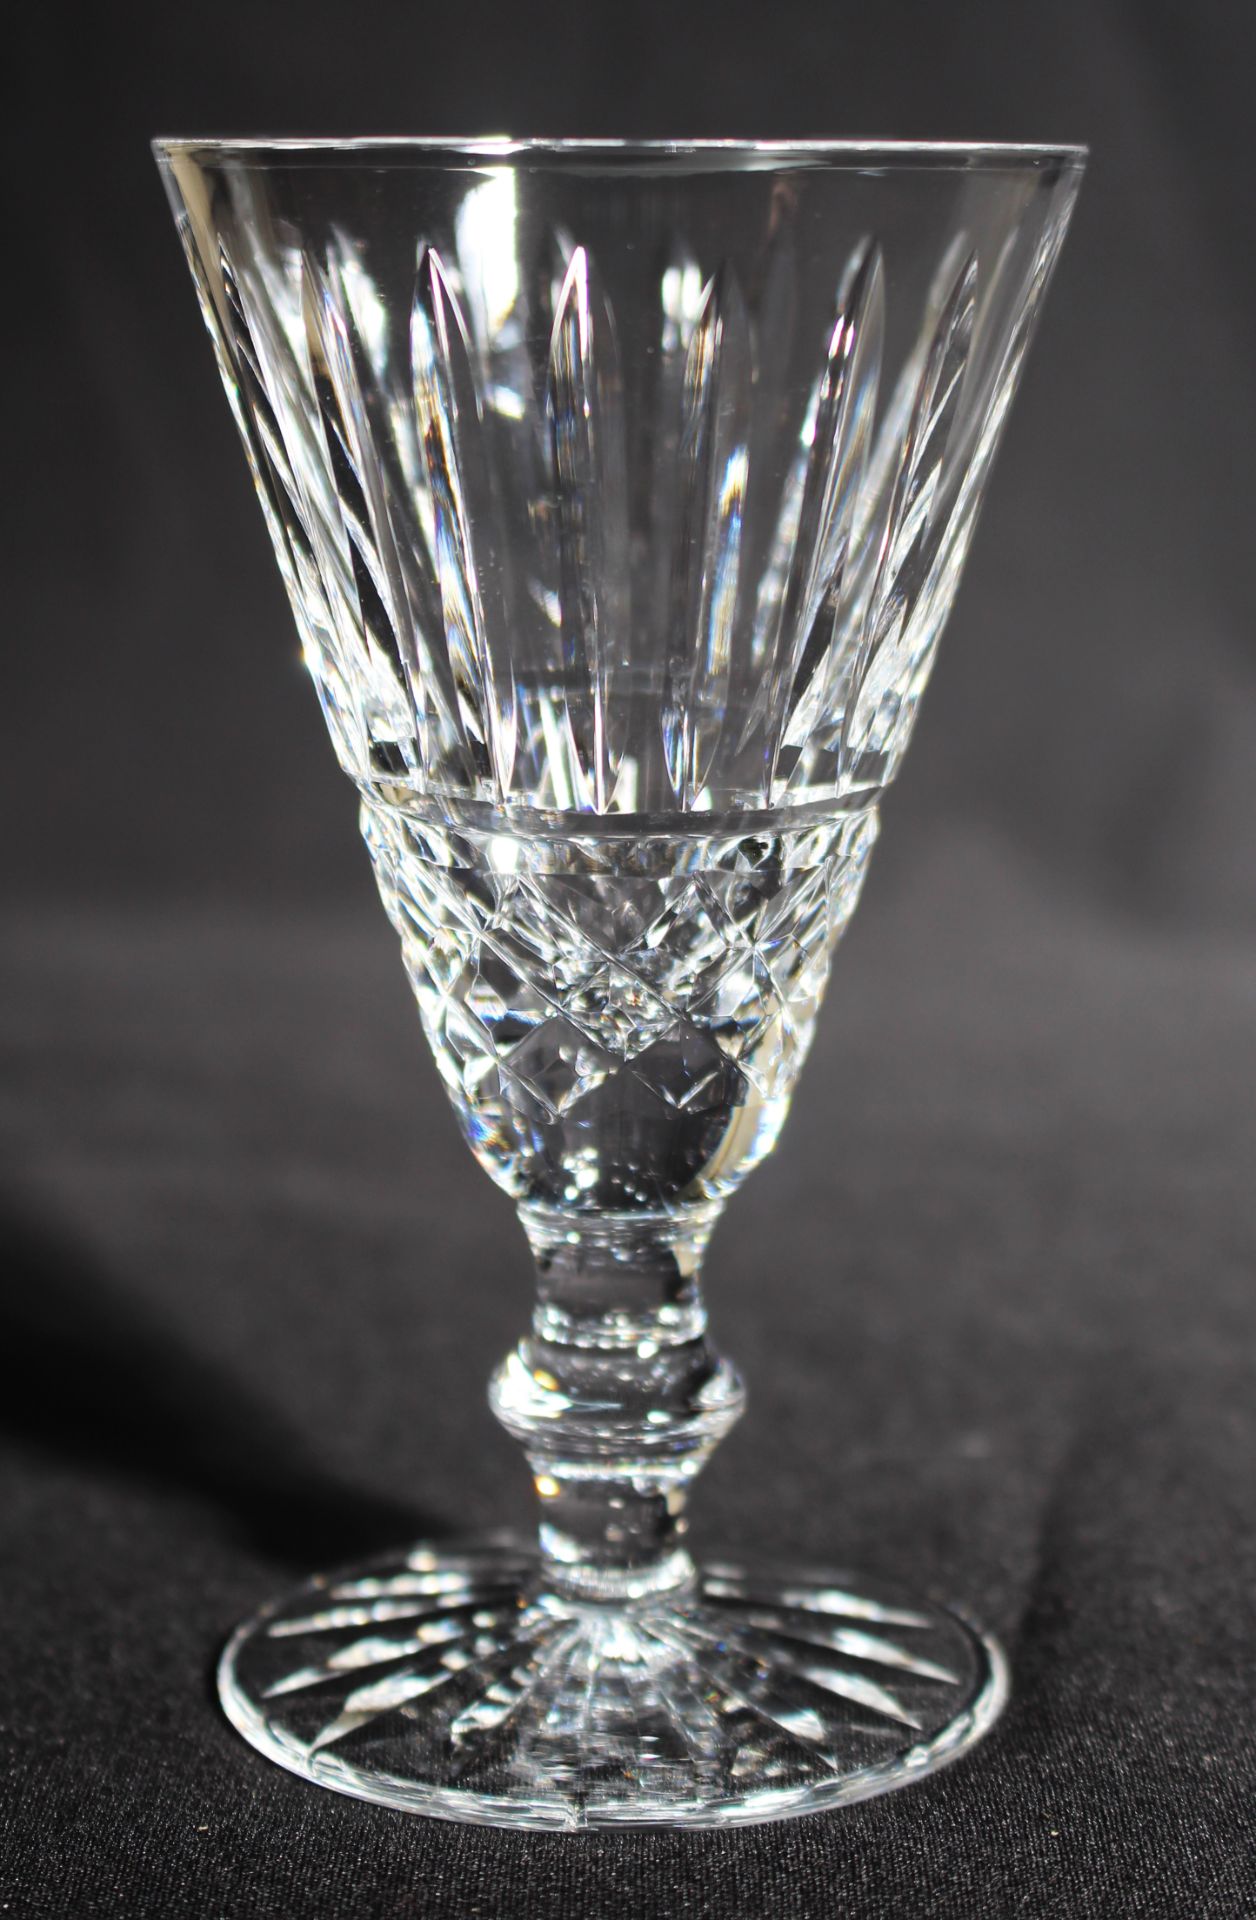 Set of 6 Vintage Waterford Cut Crystal Knopped Sherry Glasses - Image 2 of 6